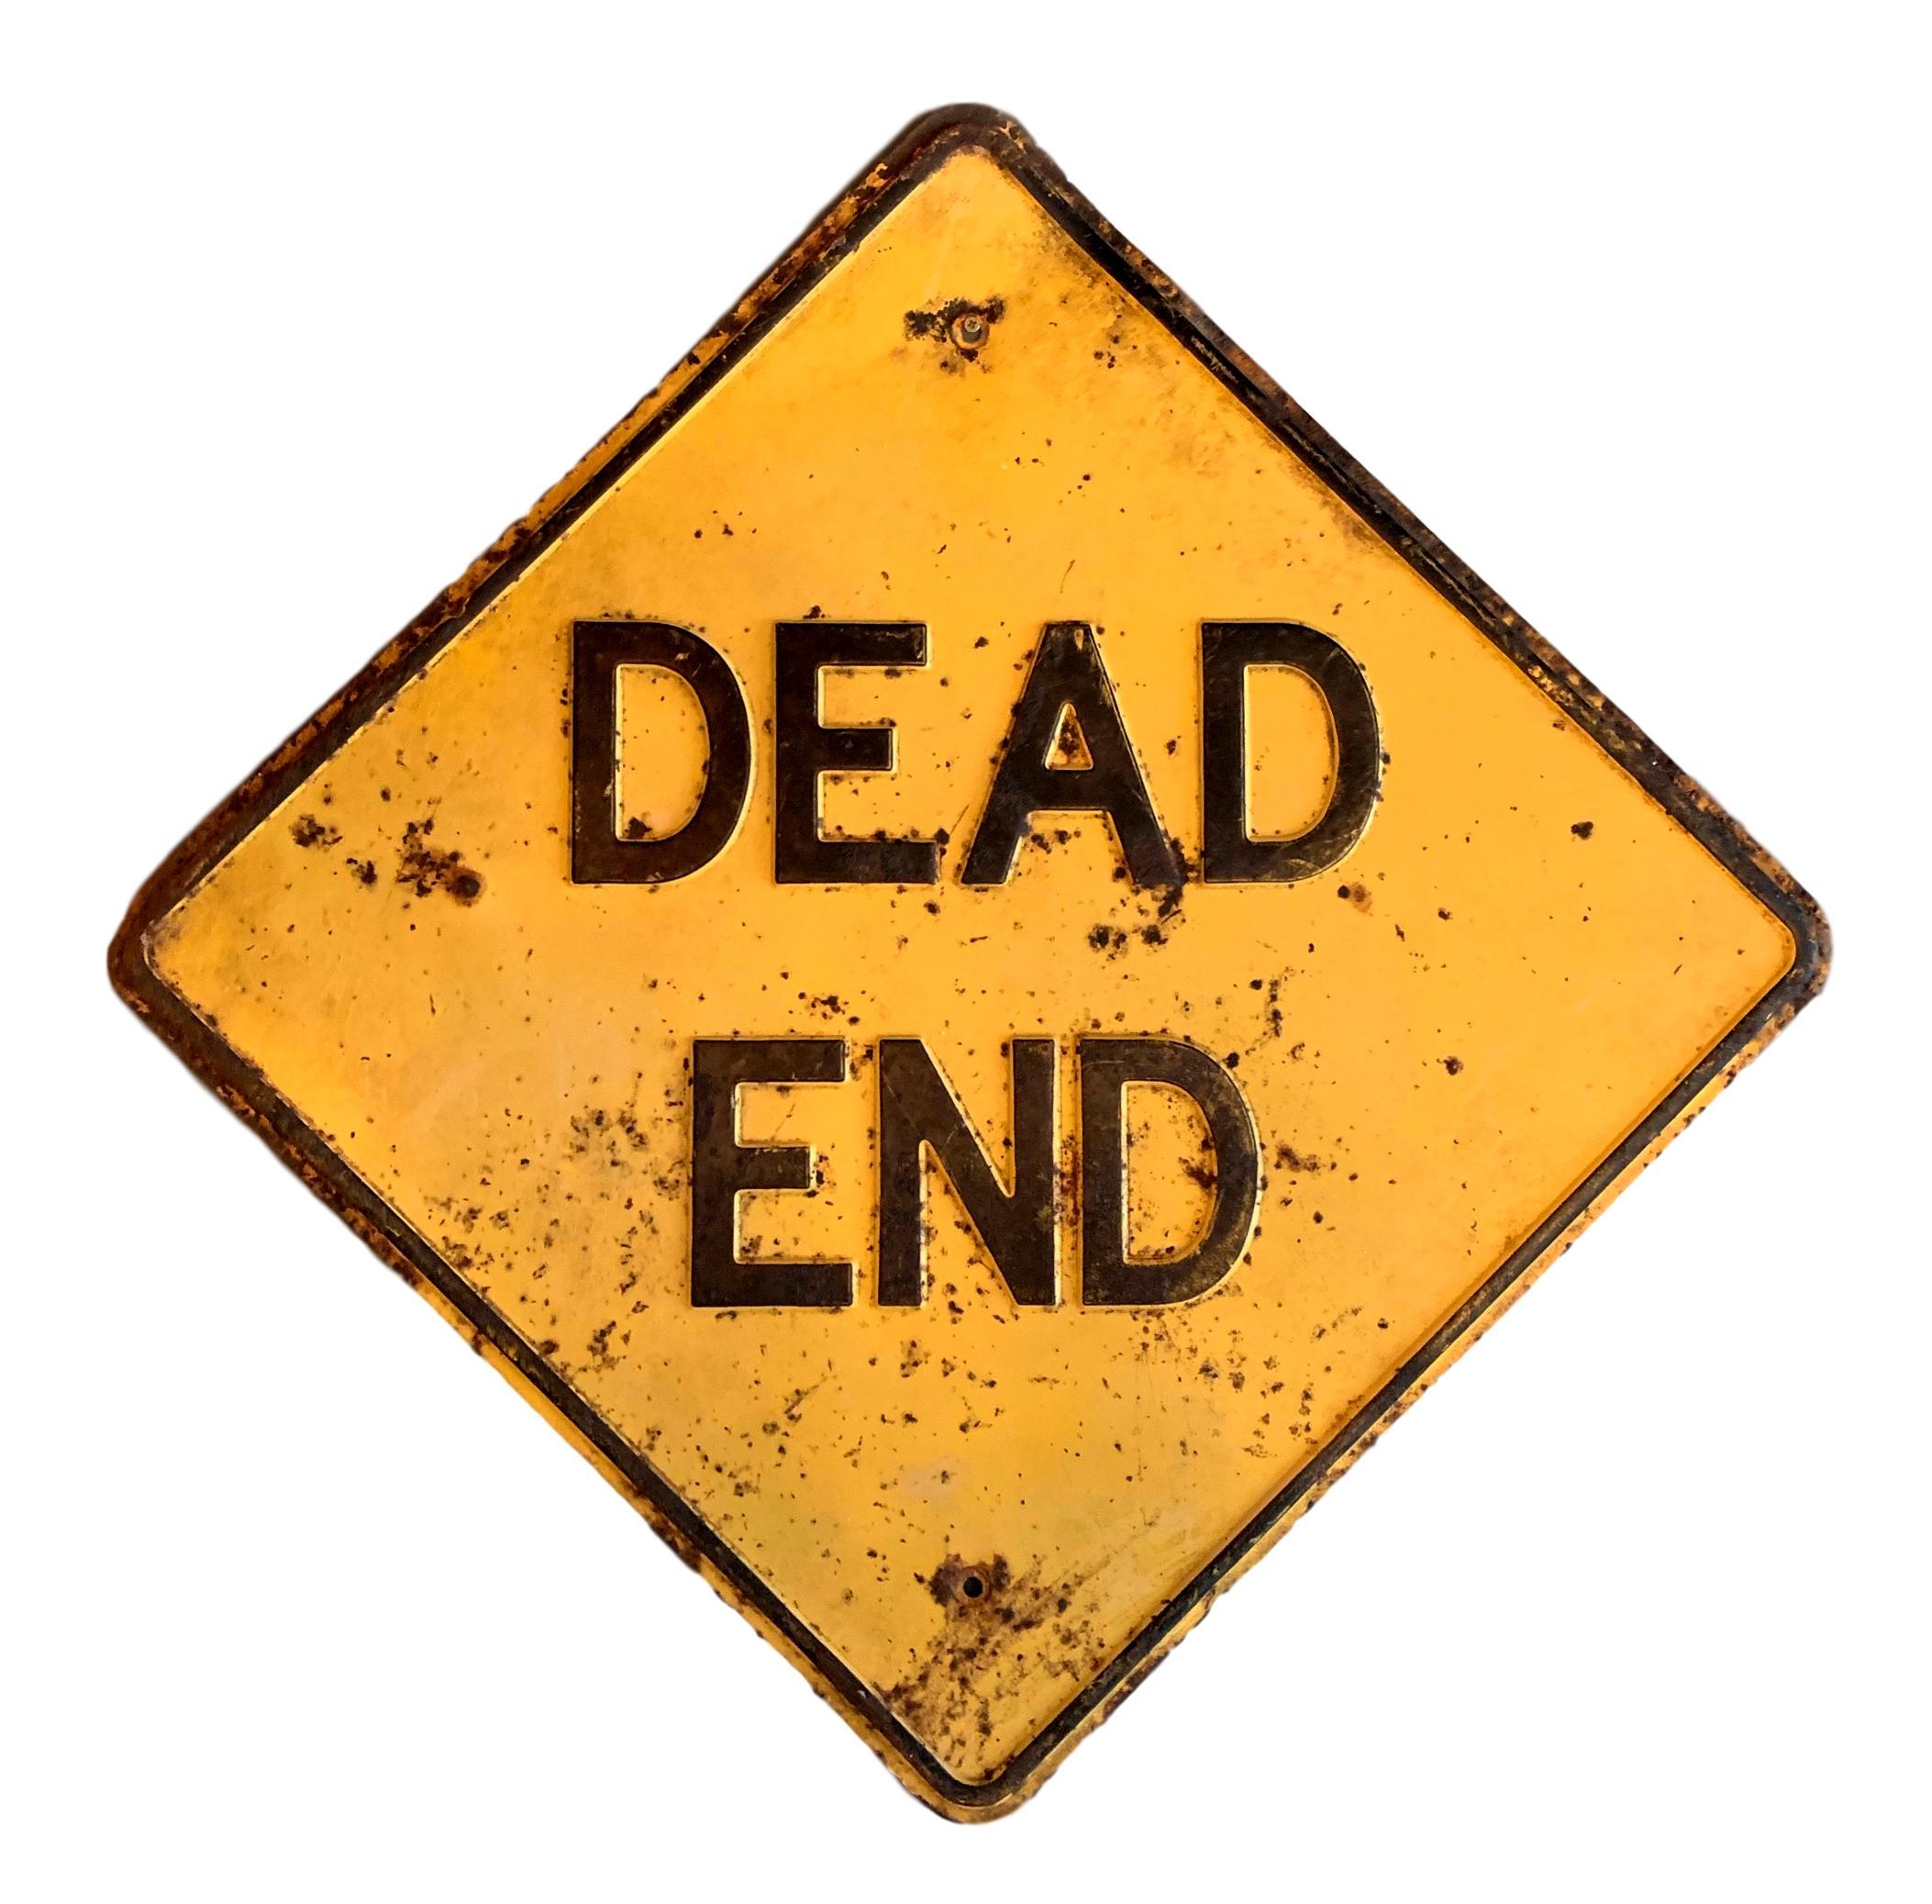 Los Angeles 'DEAD END' Embossed Street Sign For Sale